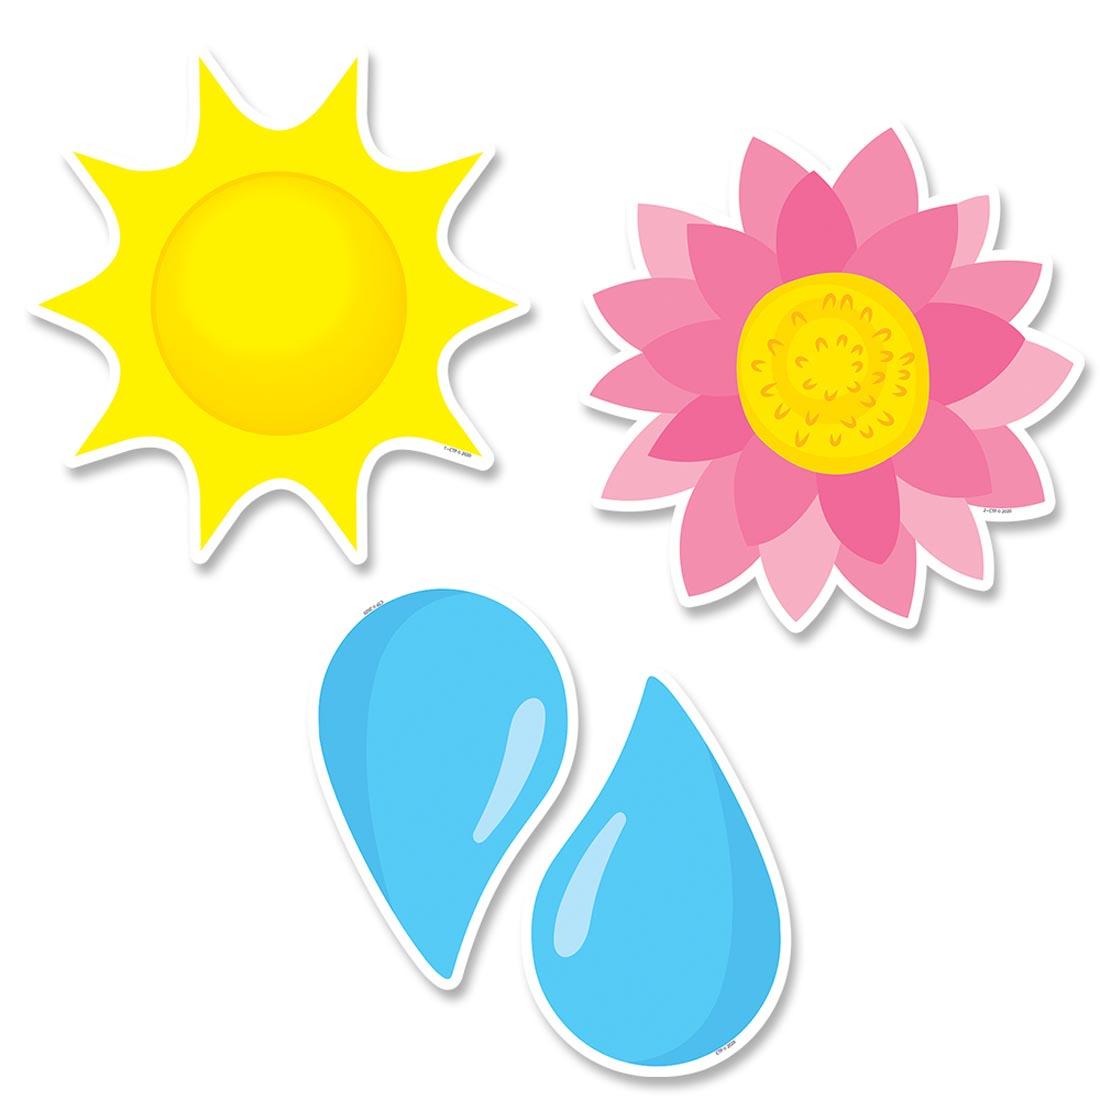 Farm Friends Sunny Blooms Designer Cut-Outs include Sun, Flower and Raindrops